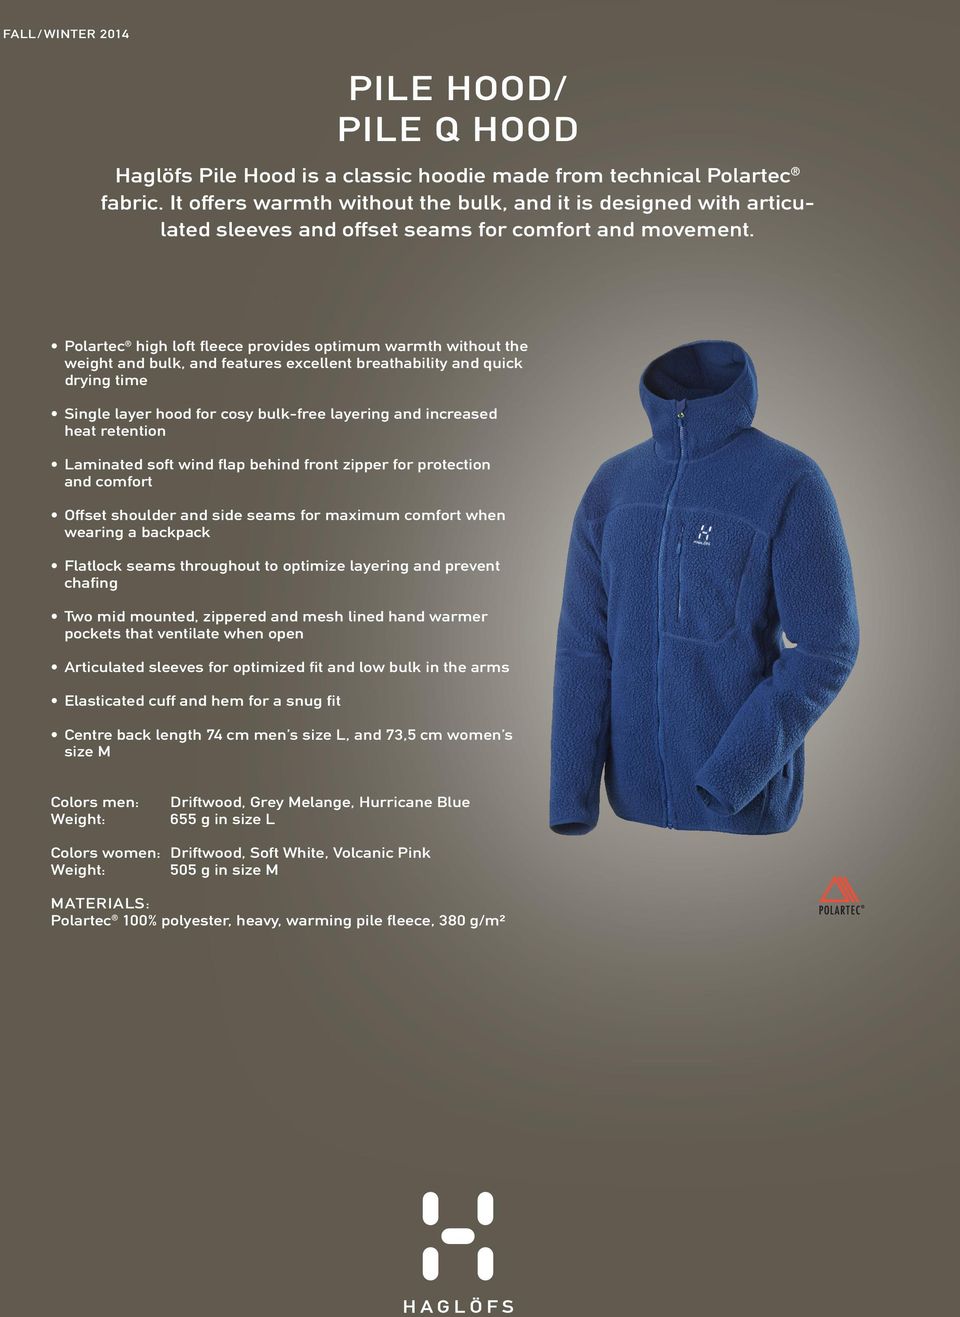 Polartec high loft fleece provides optimum warmth without the weight and bulk, and features excellent breathability and quick drying time Single layer hood for cosy bulk-free layering and increased